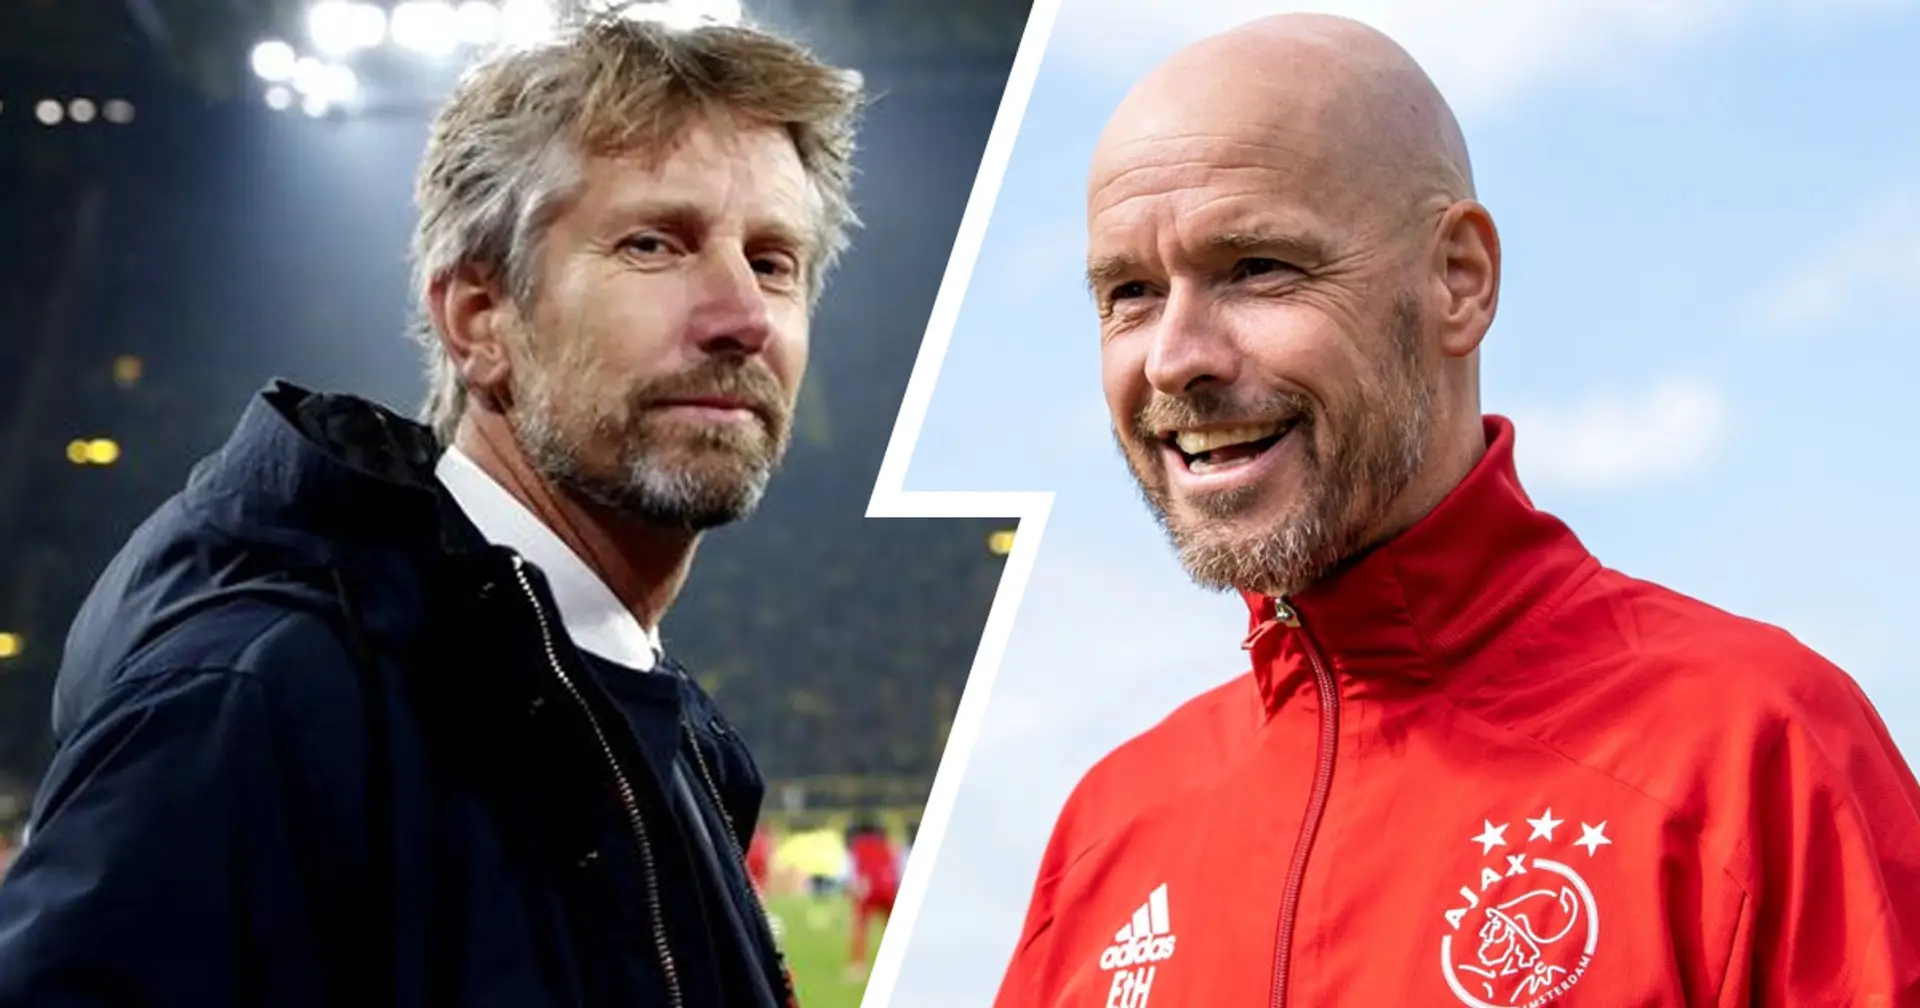 'He's making the jump to one of the biggest clubs in the world': Ajax CEO Van der Sar breaks silence on Ten Hag joining United